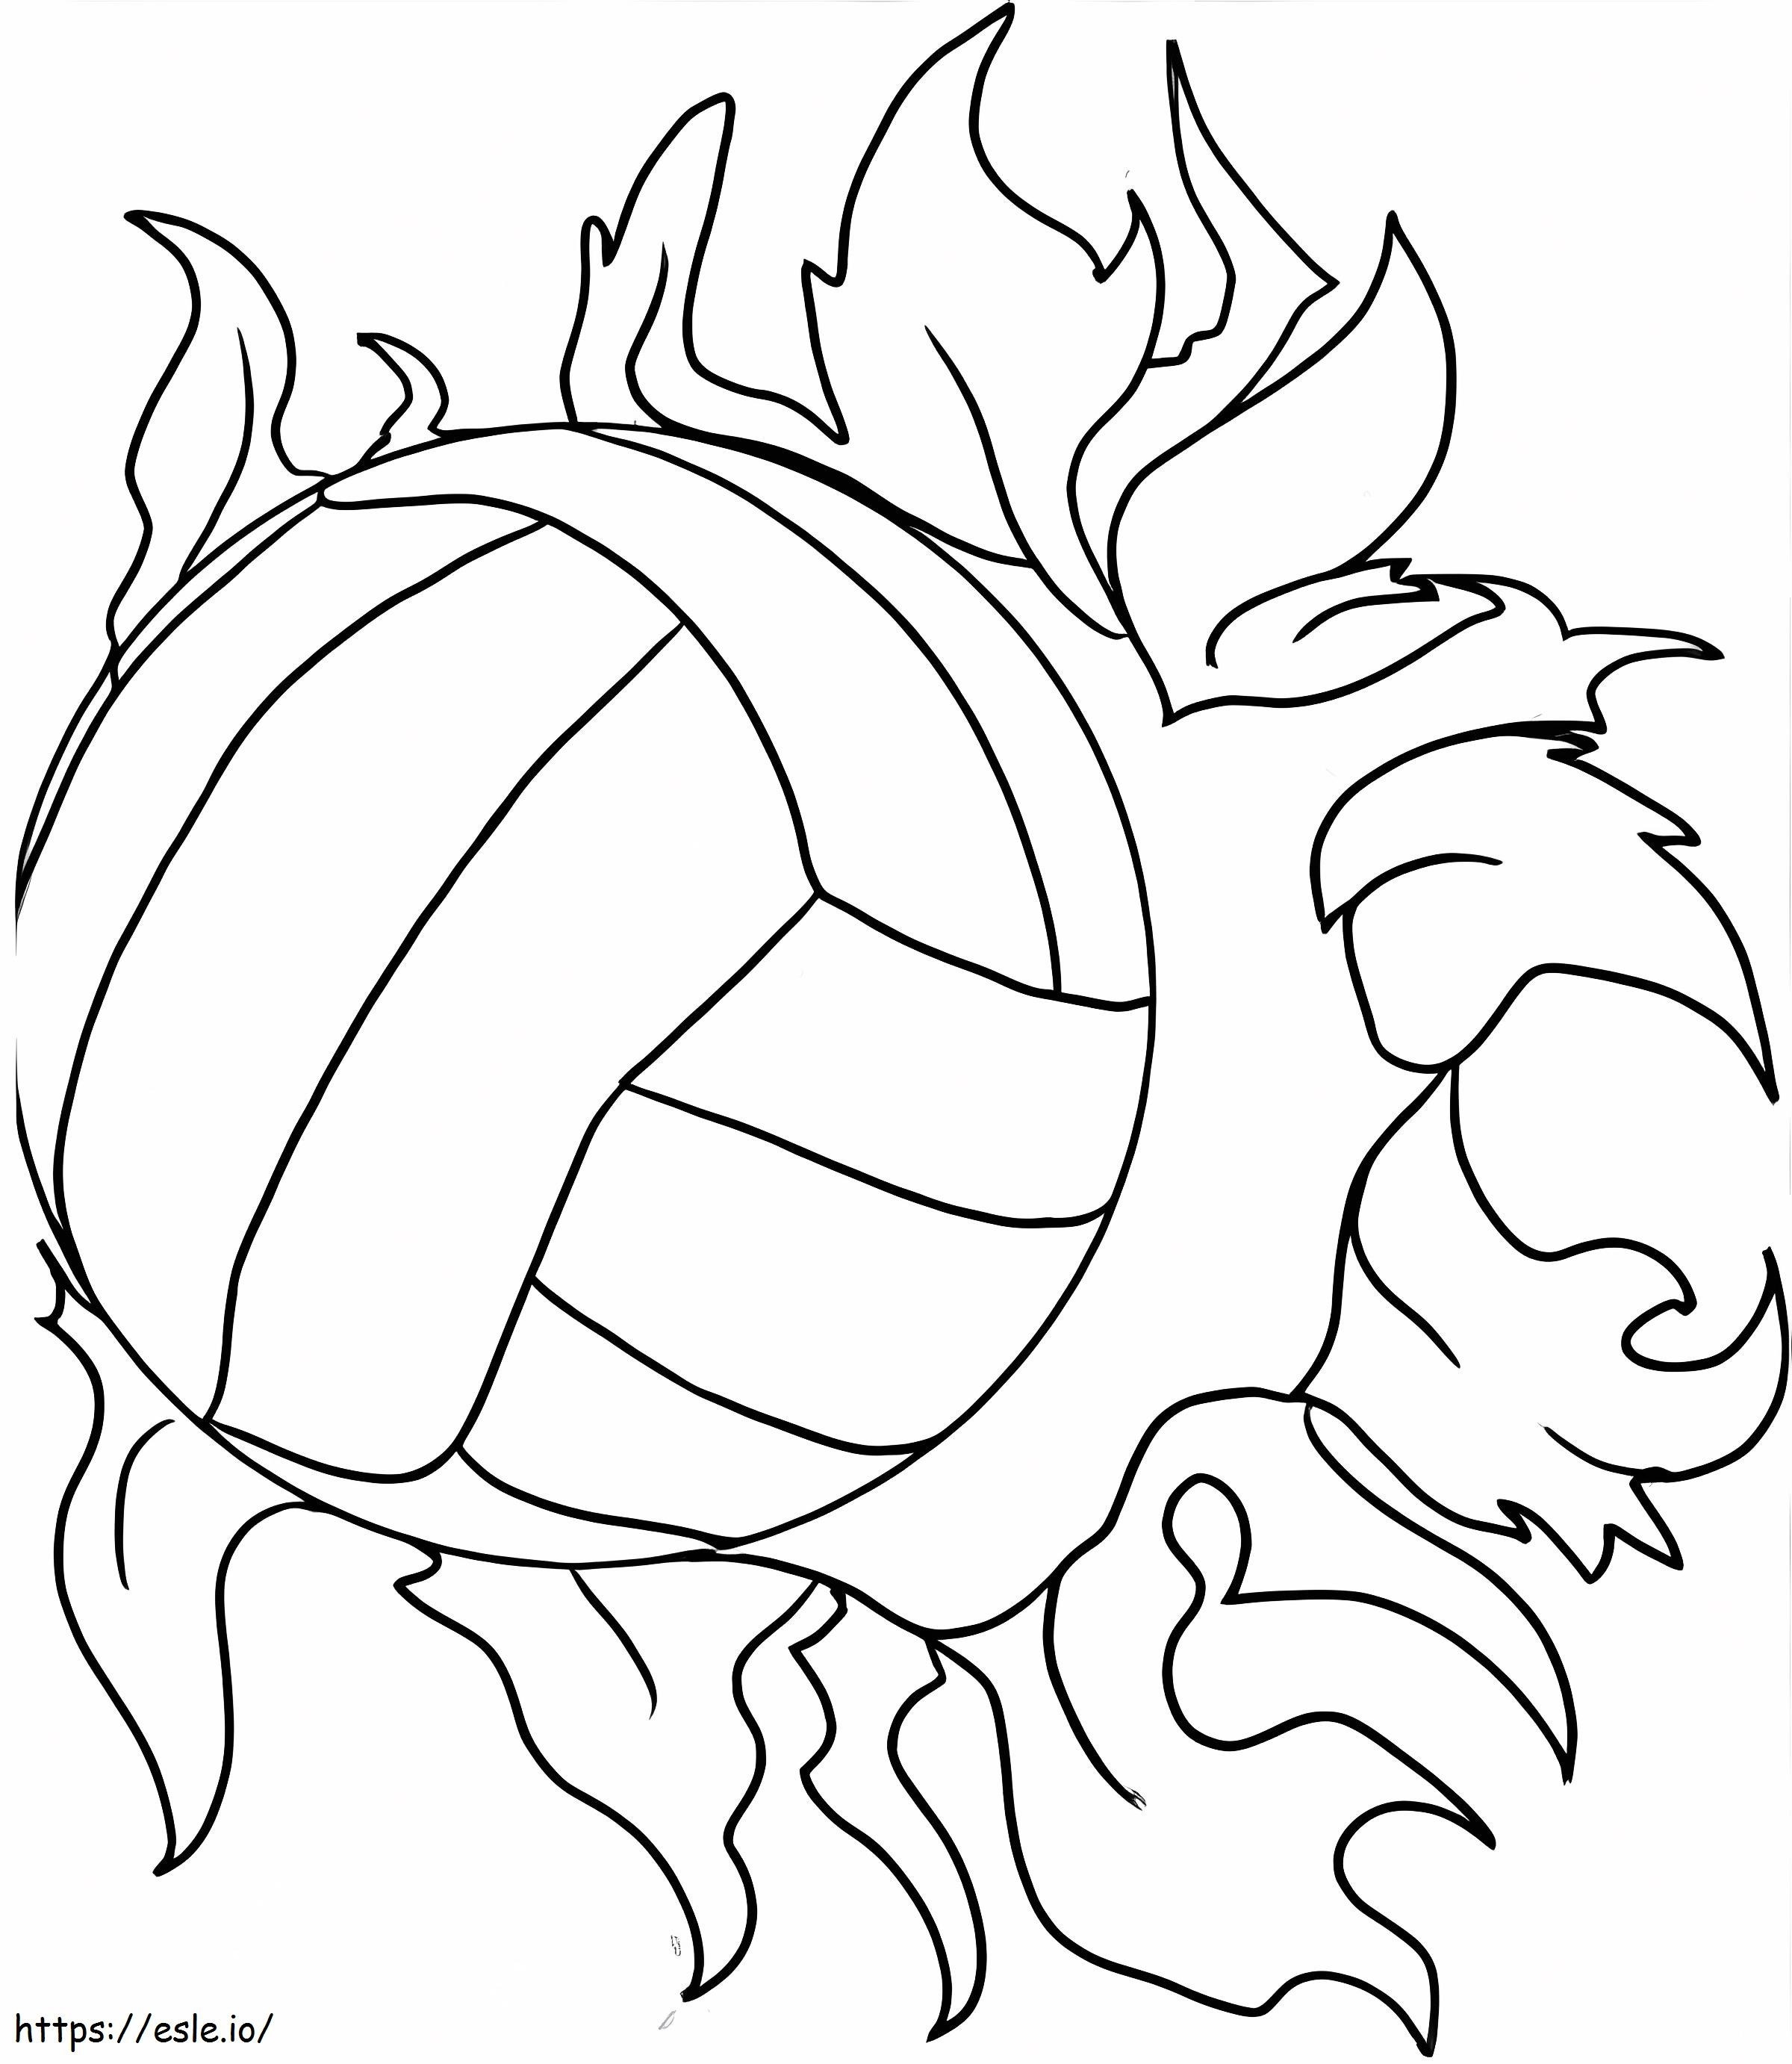 Super Power Volleyball Coloring Pages  coloring page